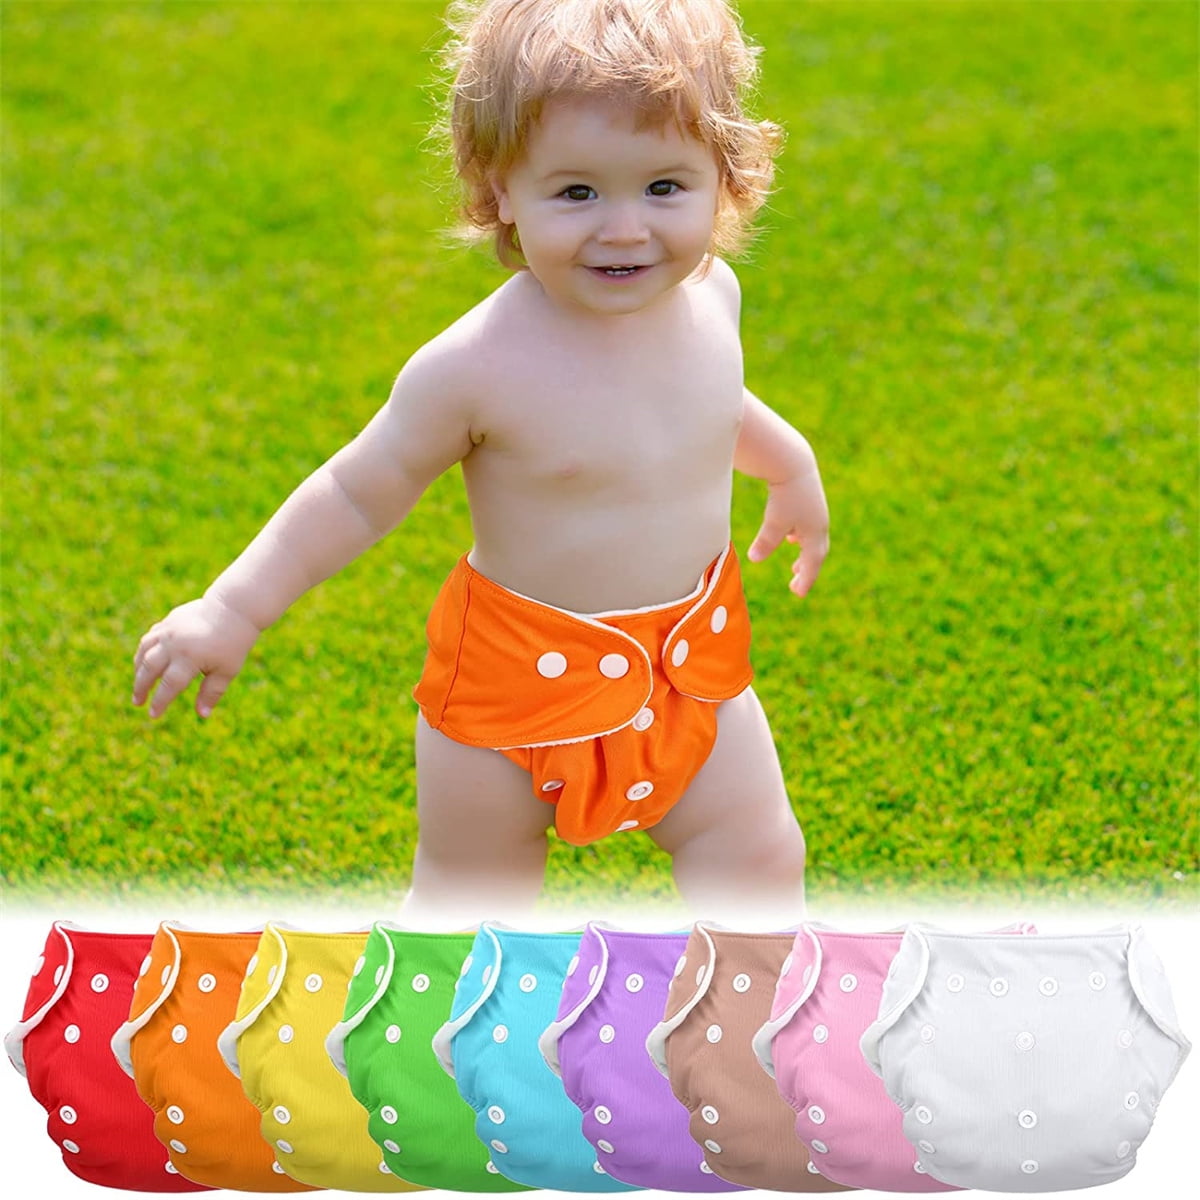 Casewin 8 Pcs Baby Cloth Diapers Adjustable Reusable Cloth Diapers One Size  Washable Nappy Covers Baby Cloth Pocket for Newborn Toddlers Boys Girls 8-25  Pound (No Inserts) 